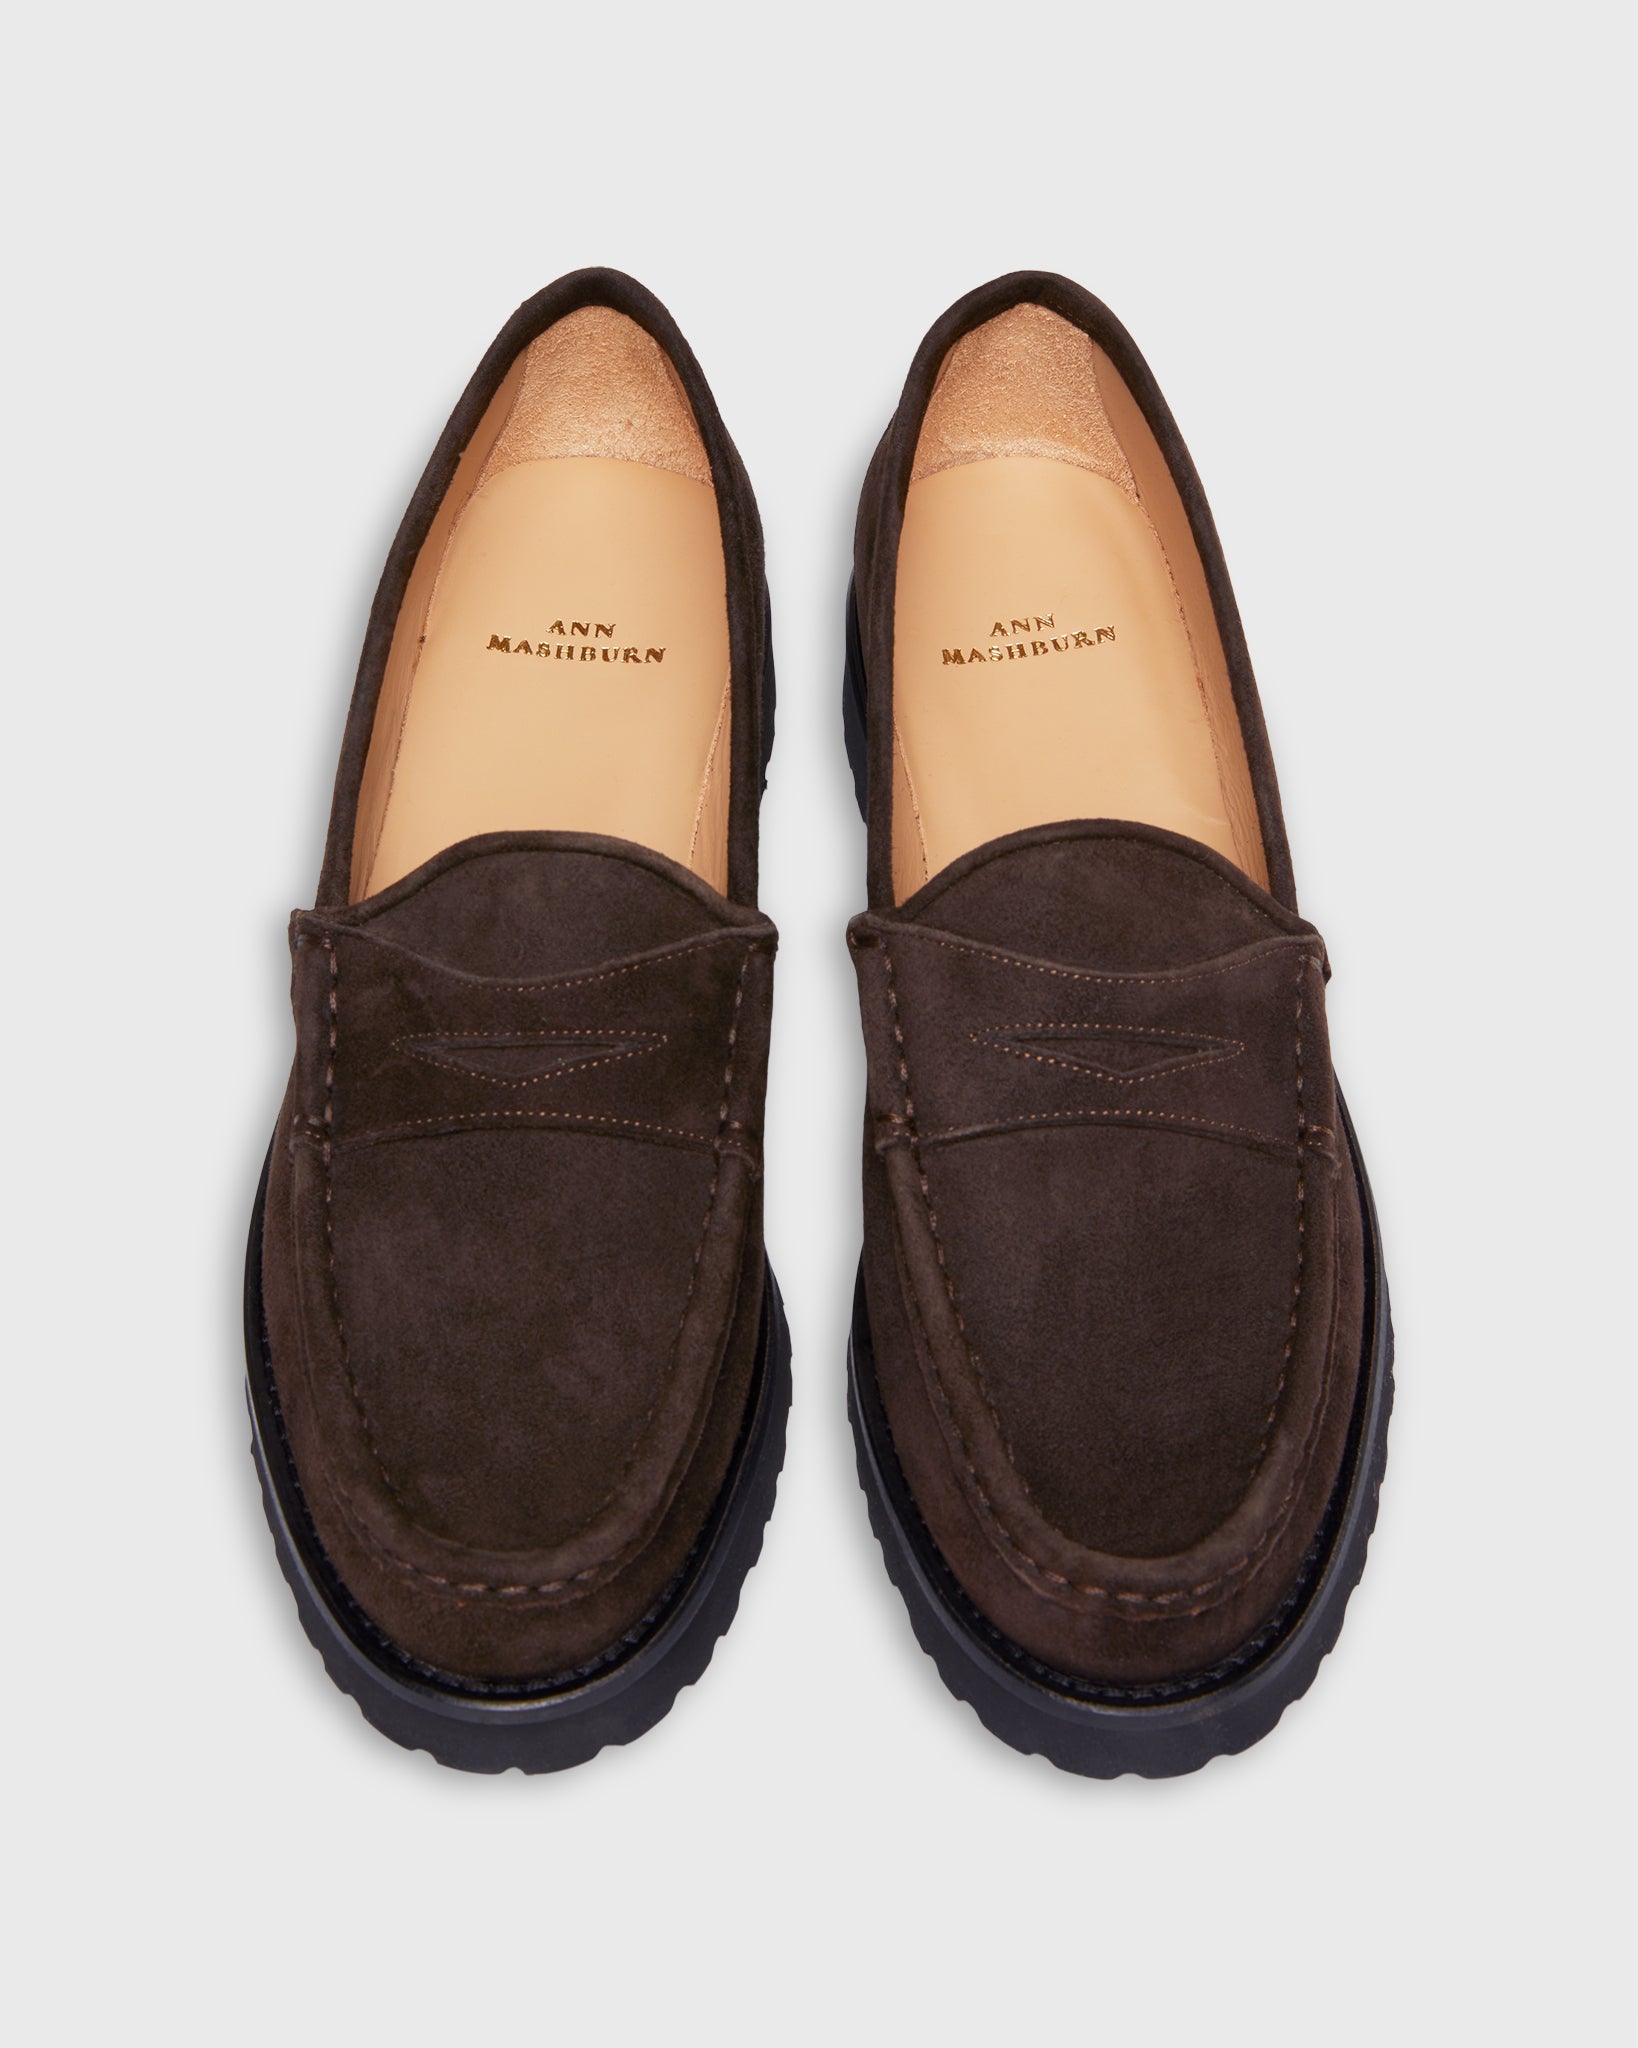 Lug Sole Loafer in Chocolate Suede